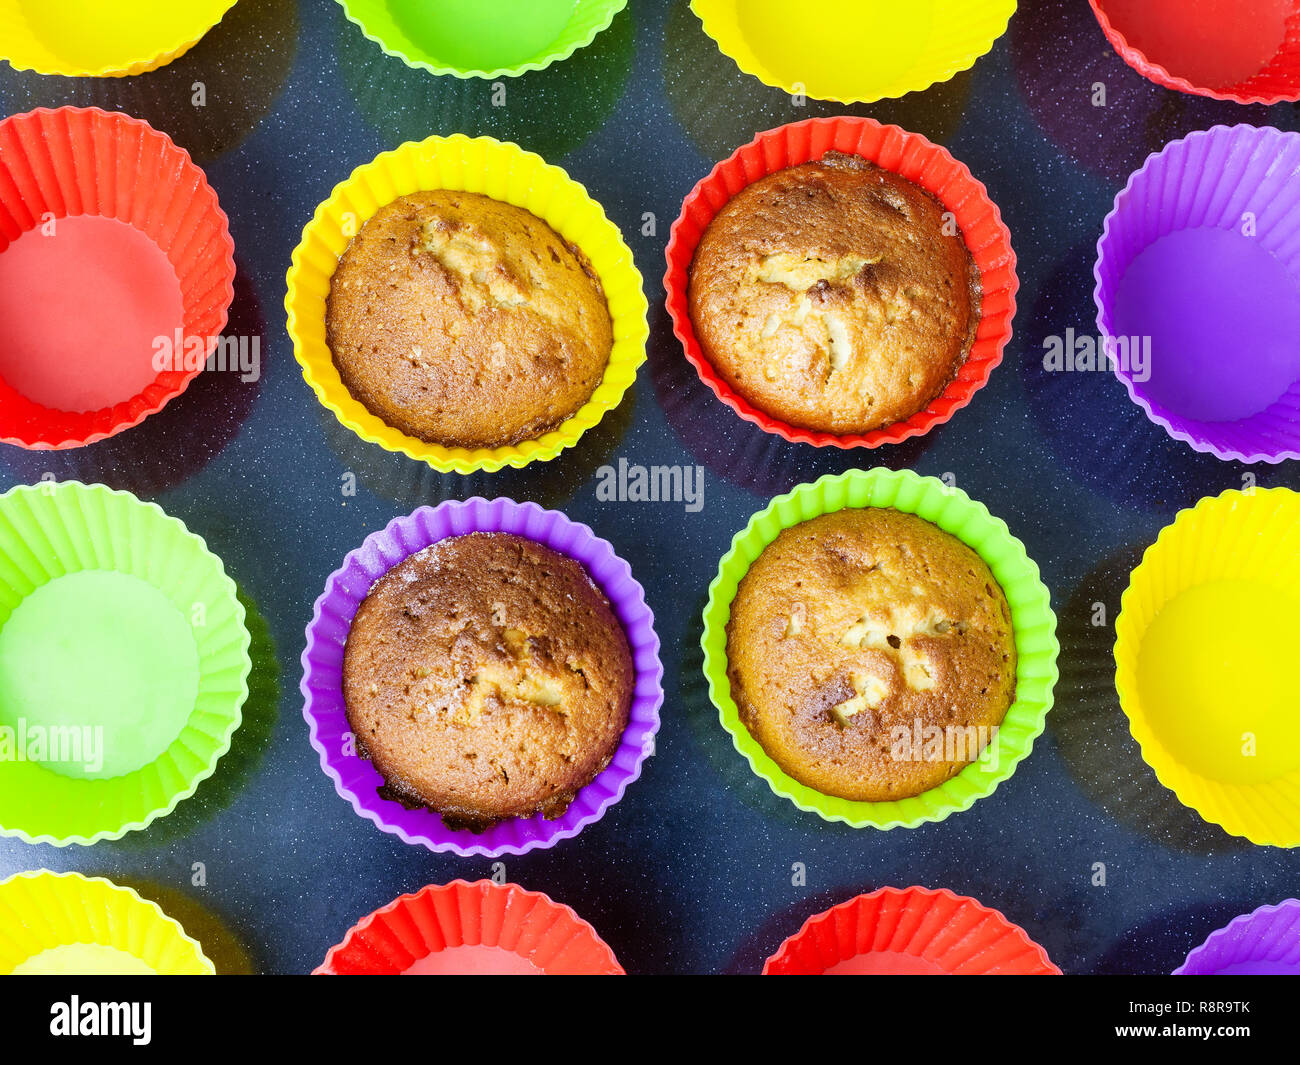 top view of four baked cupcakes in multicolored silicone molds on dark tray Stock Photo